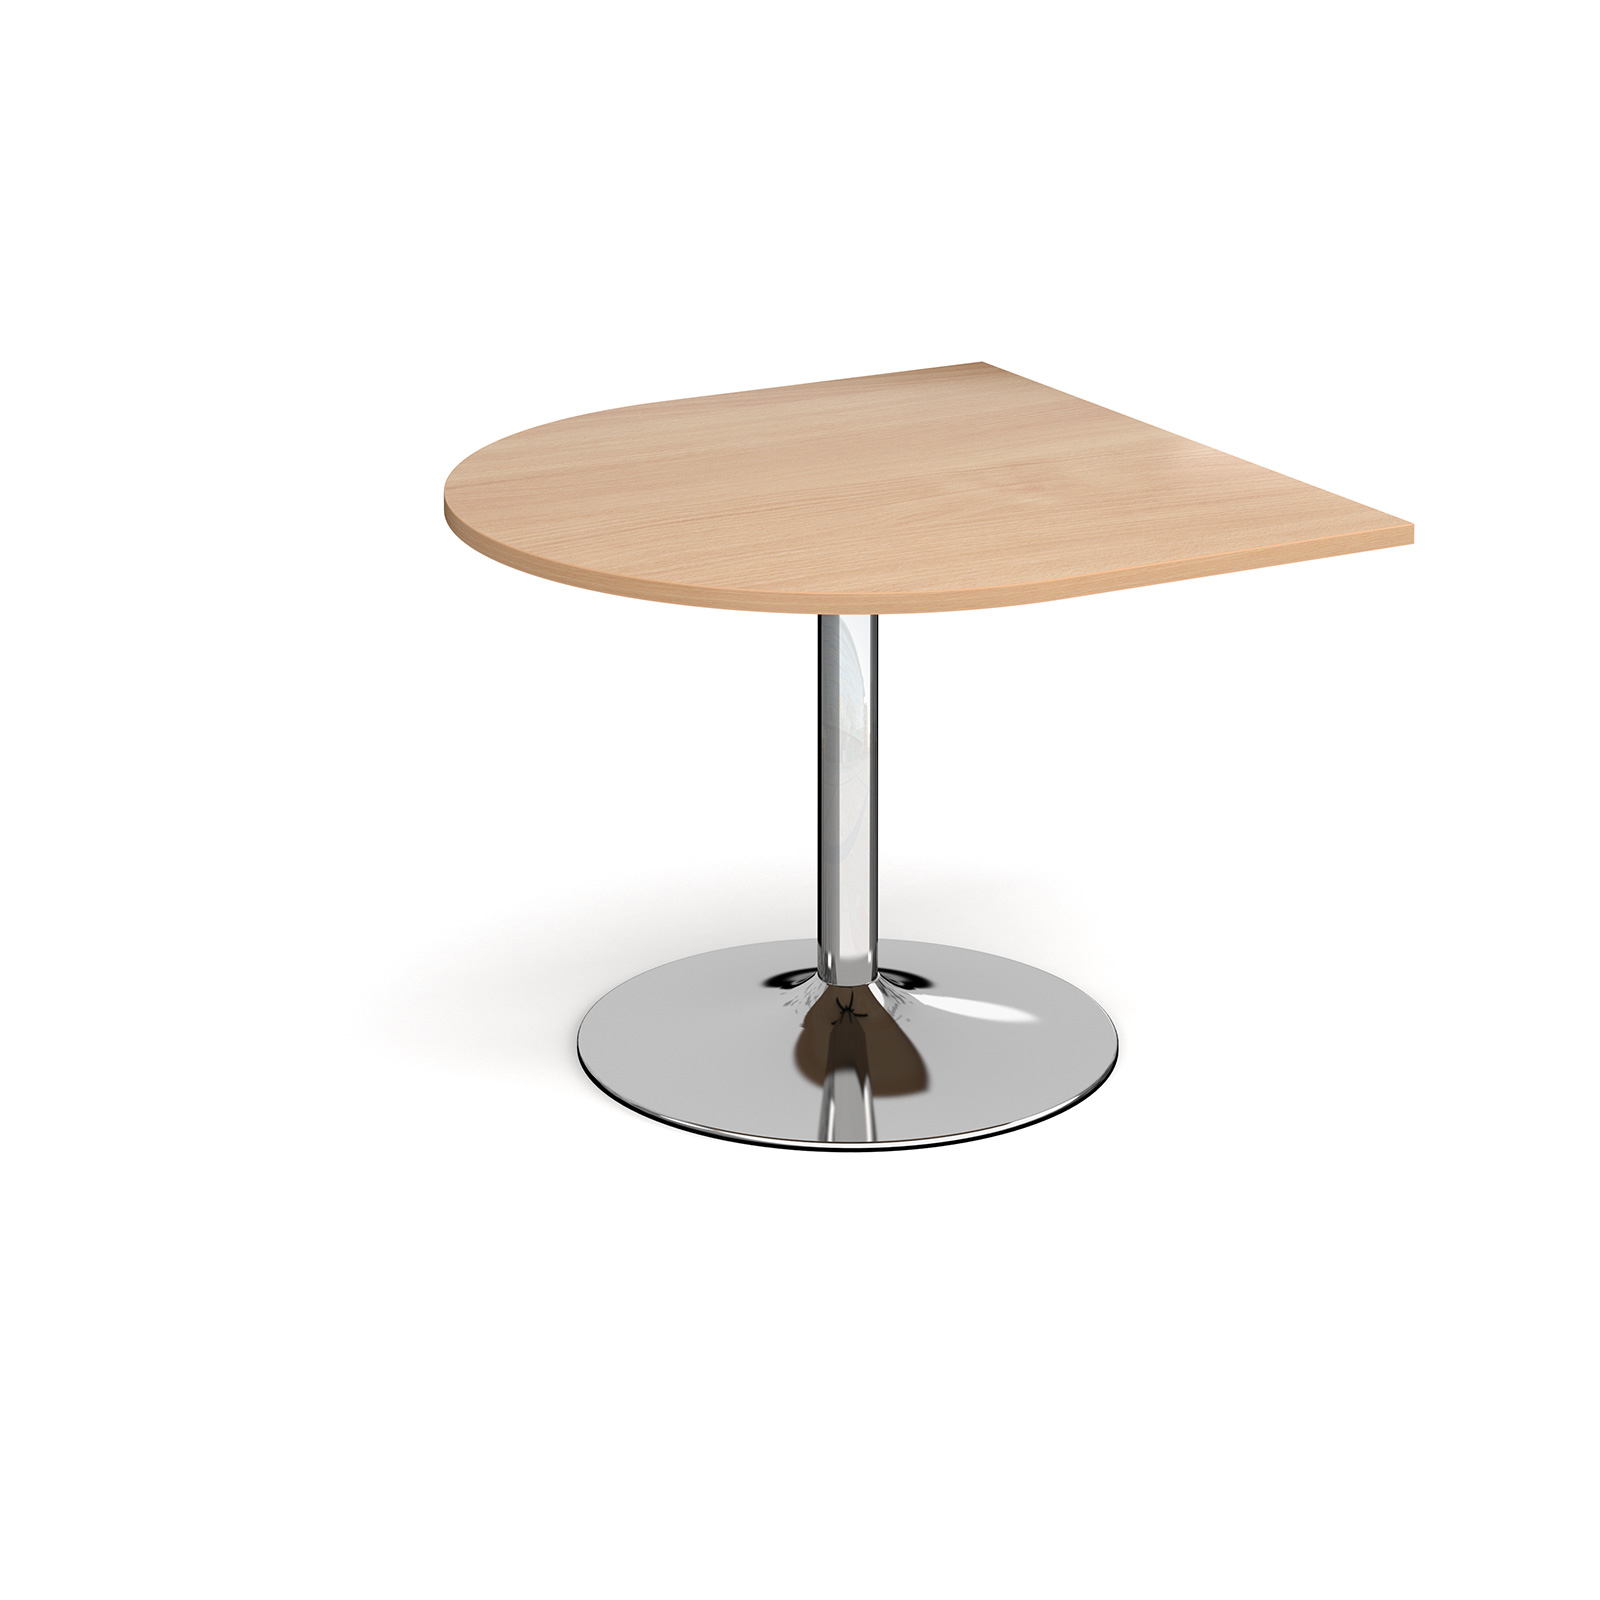 Trumpet base radial extension table 1000mm x 1000mm - chrome base, beech top